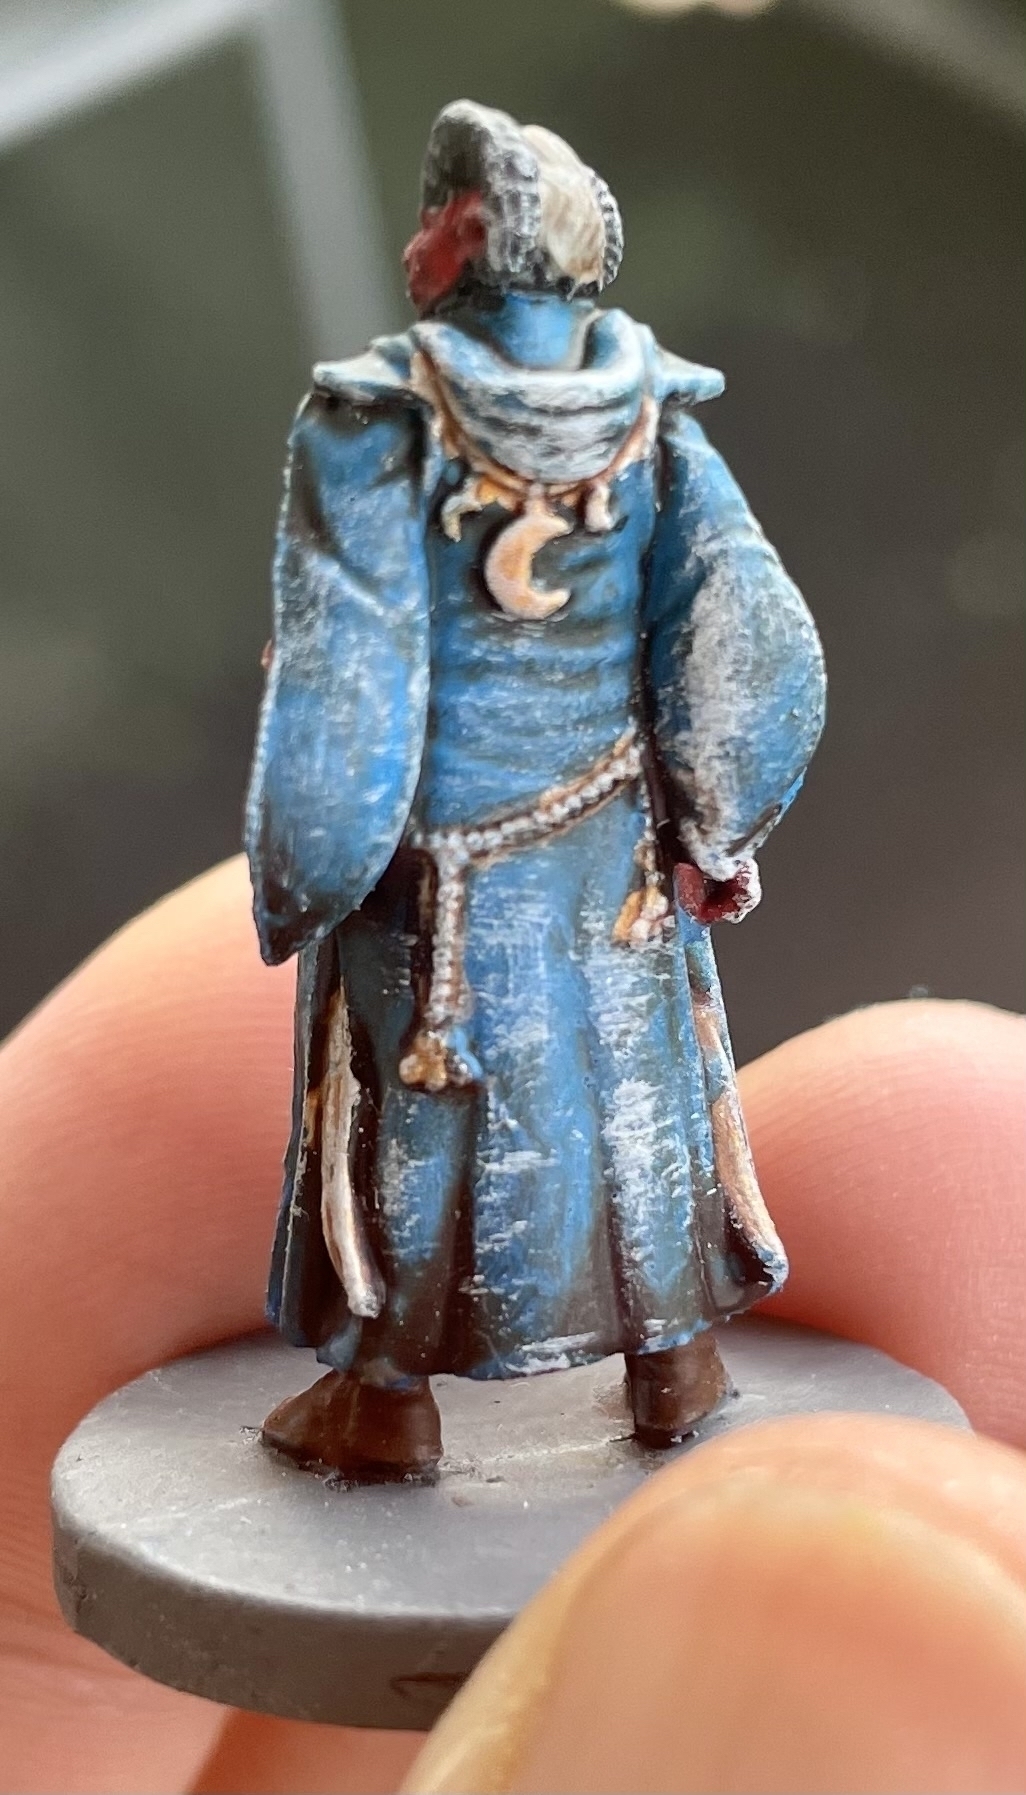 Tiefling painted by my eleven years old son. 